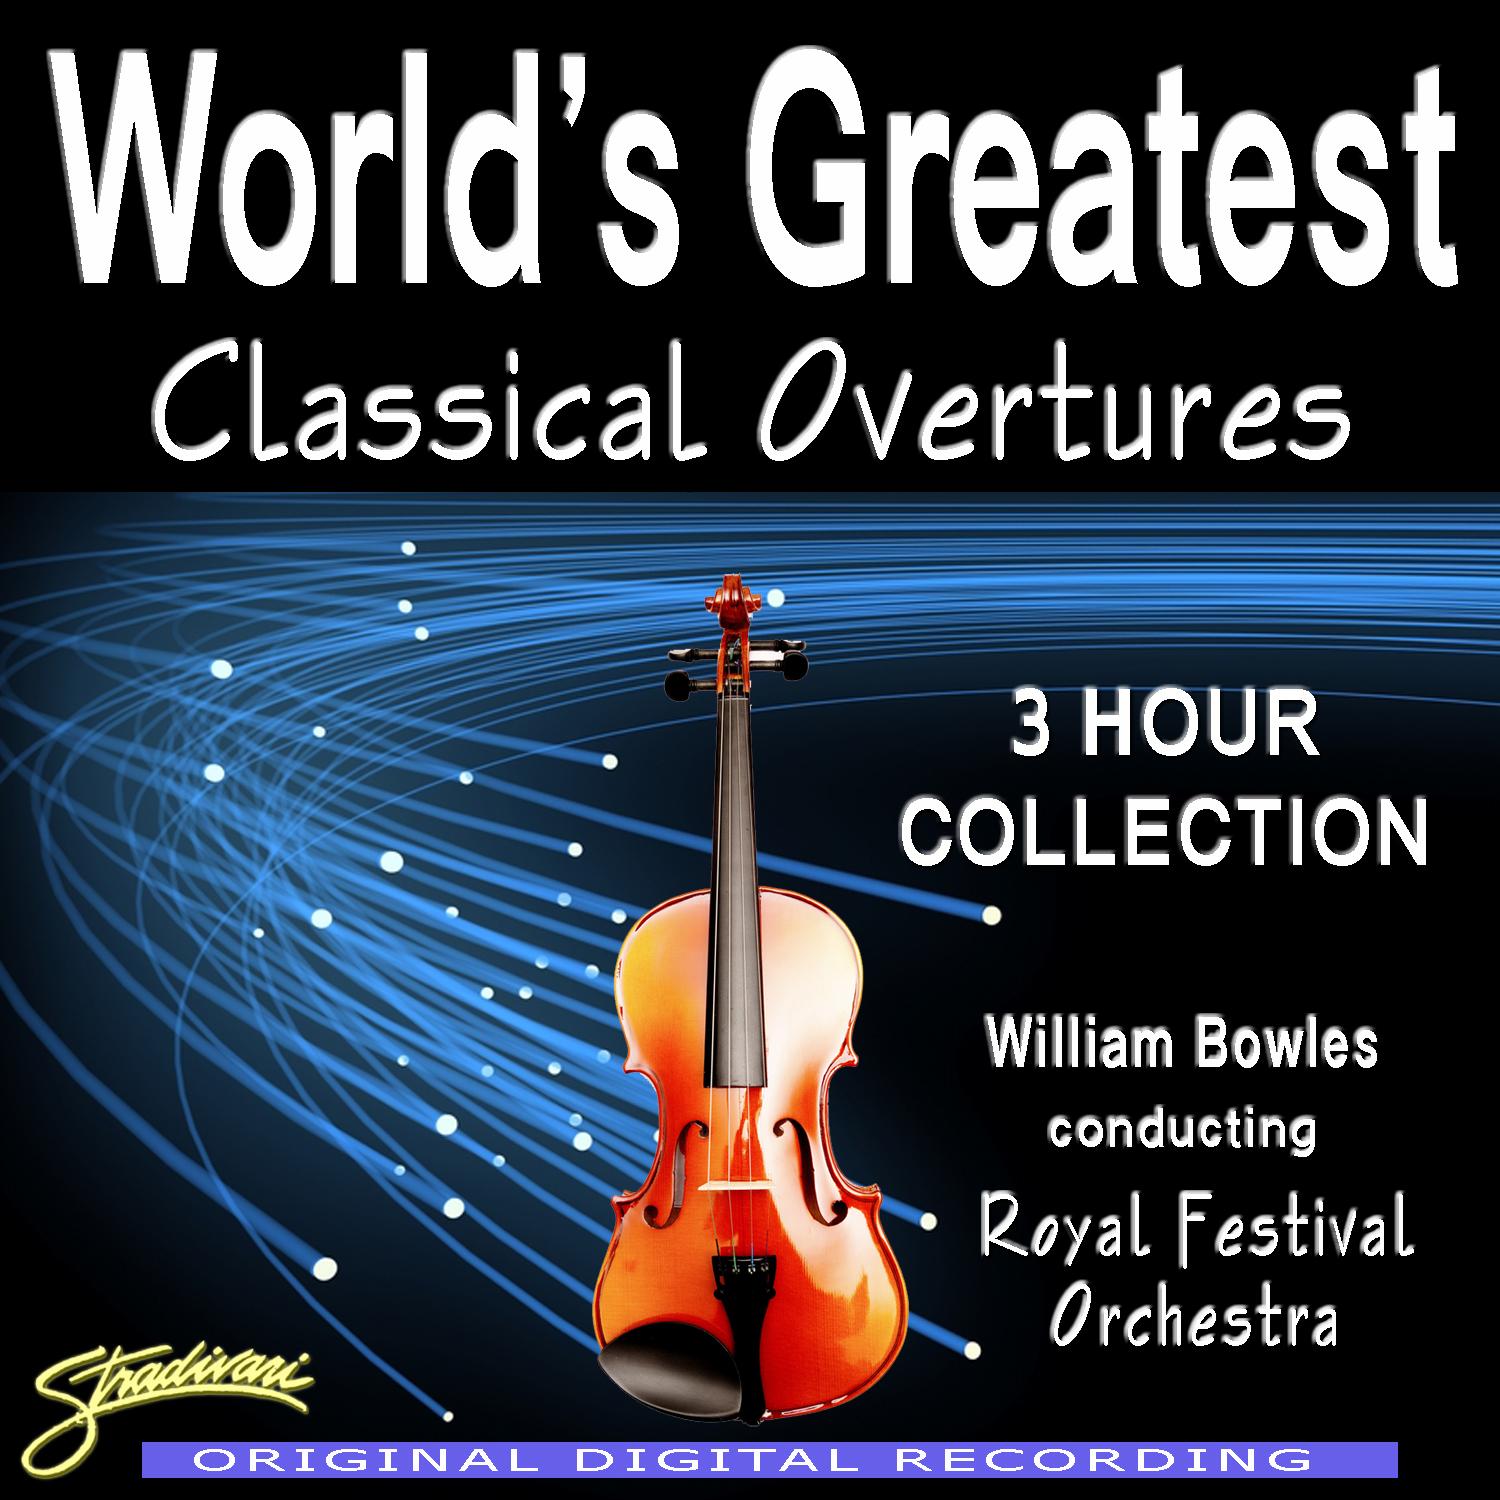 World's Greatest Classical Overtures